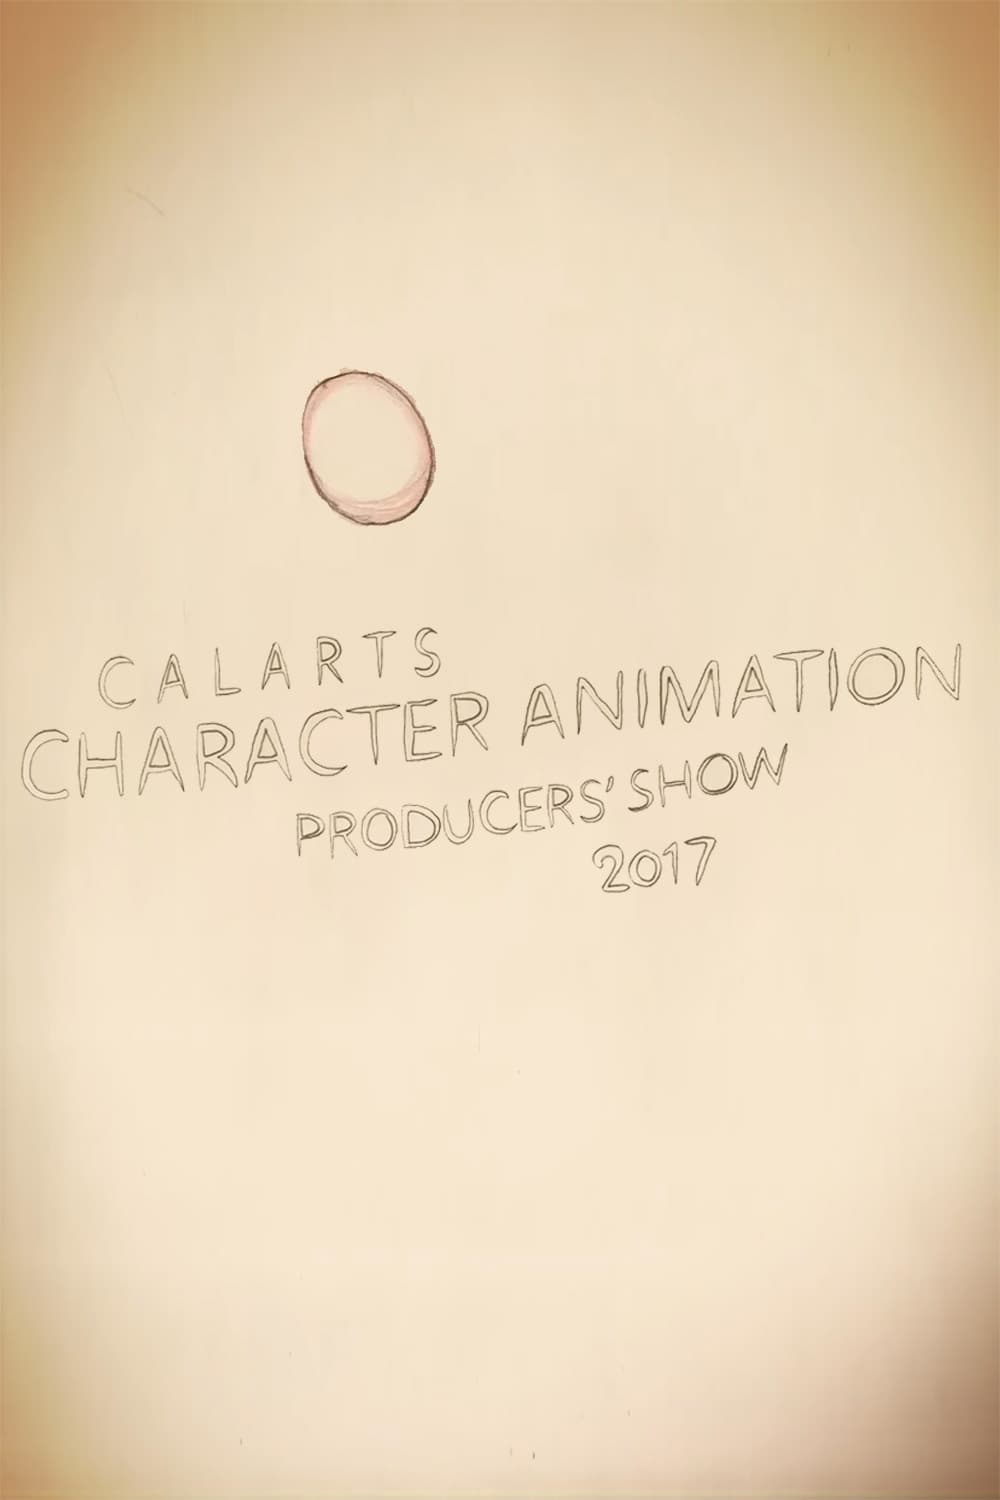 CalArts Character Animation Producers’ Show 2017 Intro